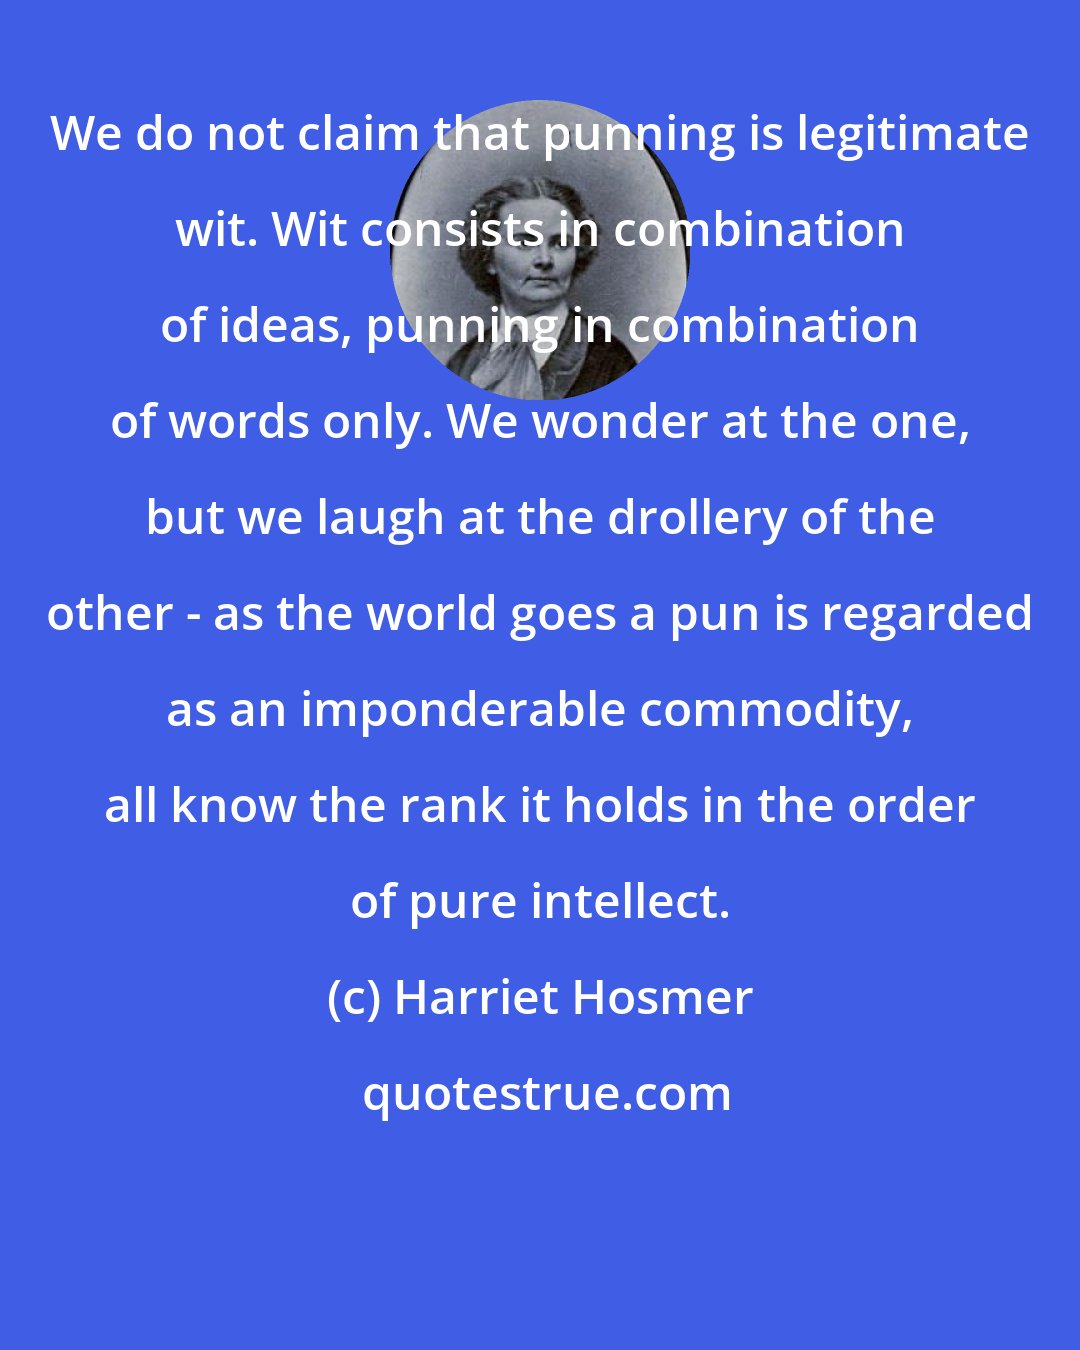 Harriet Hosmer: We do not claim that punning is legitimate wit. Wit consists in combination of ideas, punning in combination of words only. We wonder at the one, but we laugh at the drollery of the other - as the world goes a pun is regarded as an imponderable commodity, all know the rank it holds in the order of pure intellect.